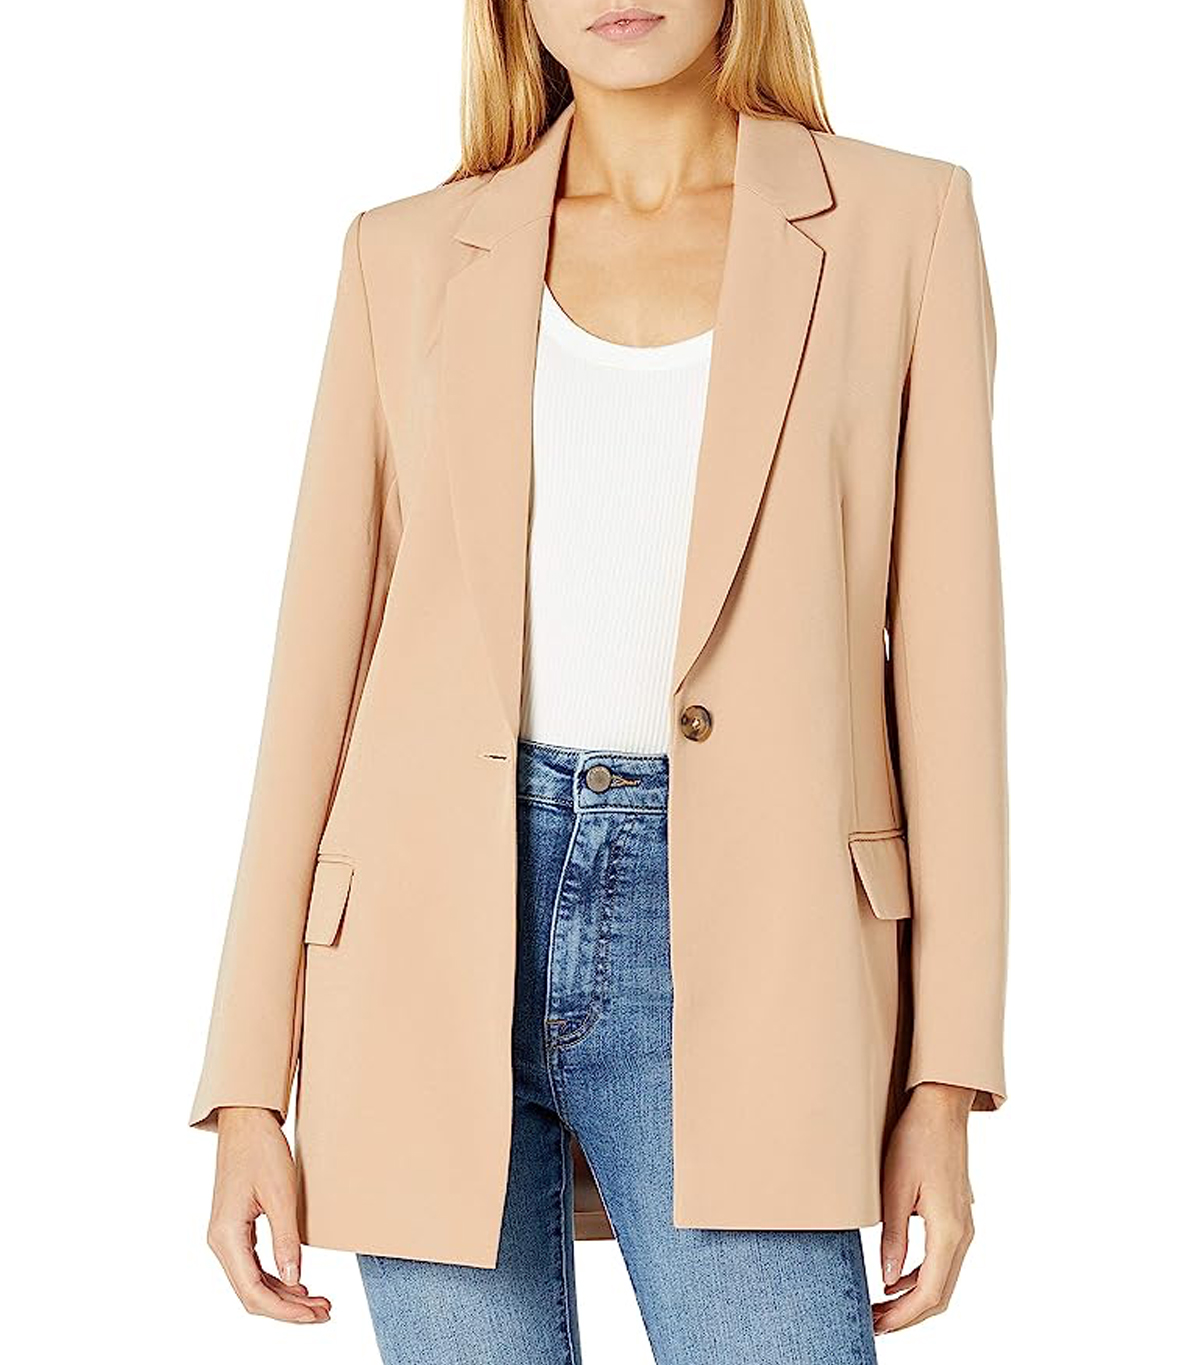 10 Anti-Trend Basics Every Woman Needs From Amazon | Who What Wear